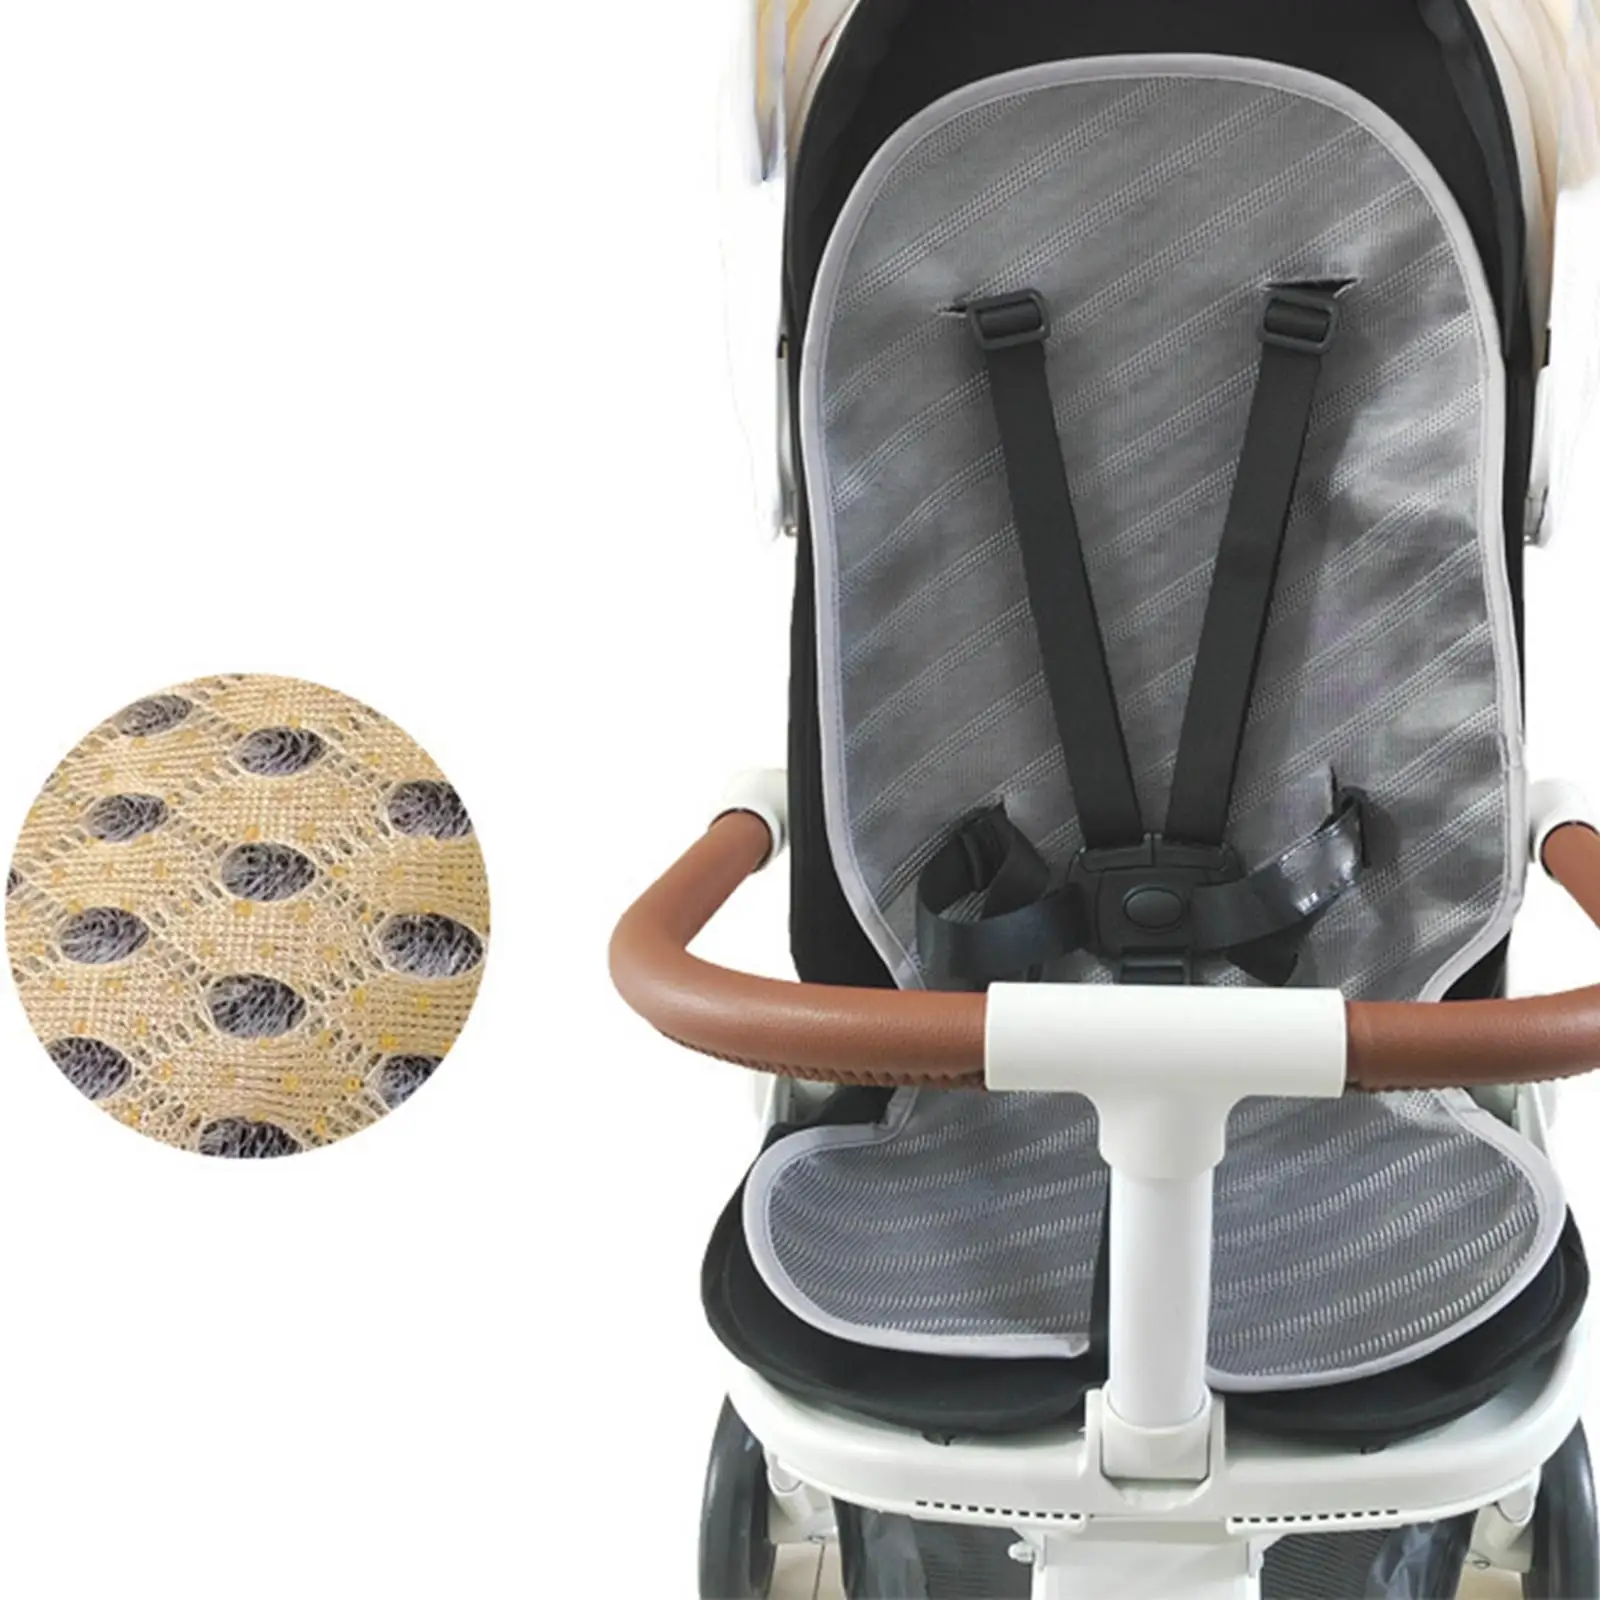 Summer Cooling Seat Pad Multifunctional Cool Seat Pad Mat Pushchair Seat Cooling Mat for Baby Dining Chair Child Safety Seat